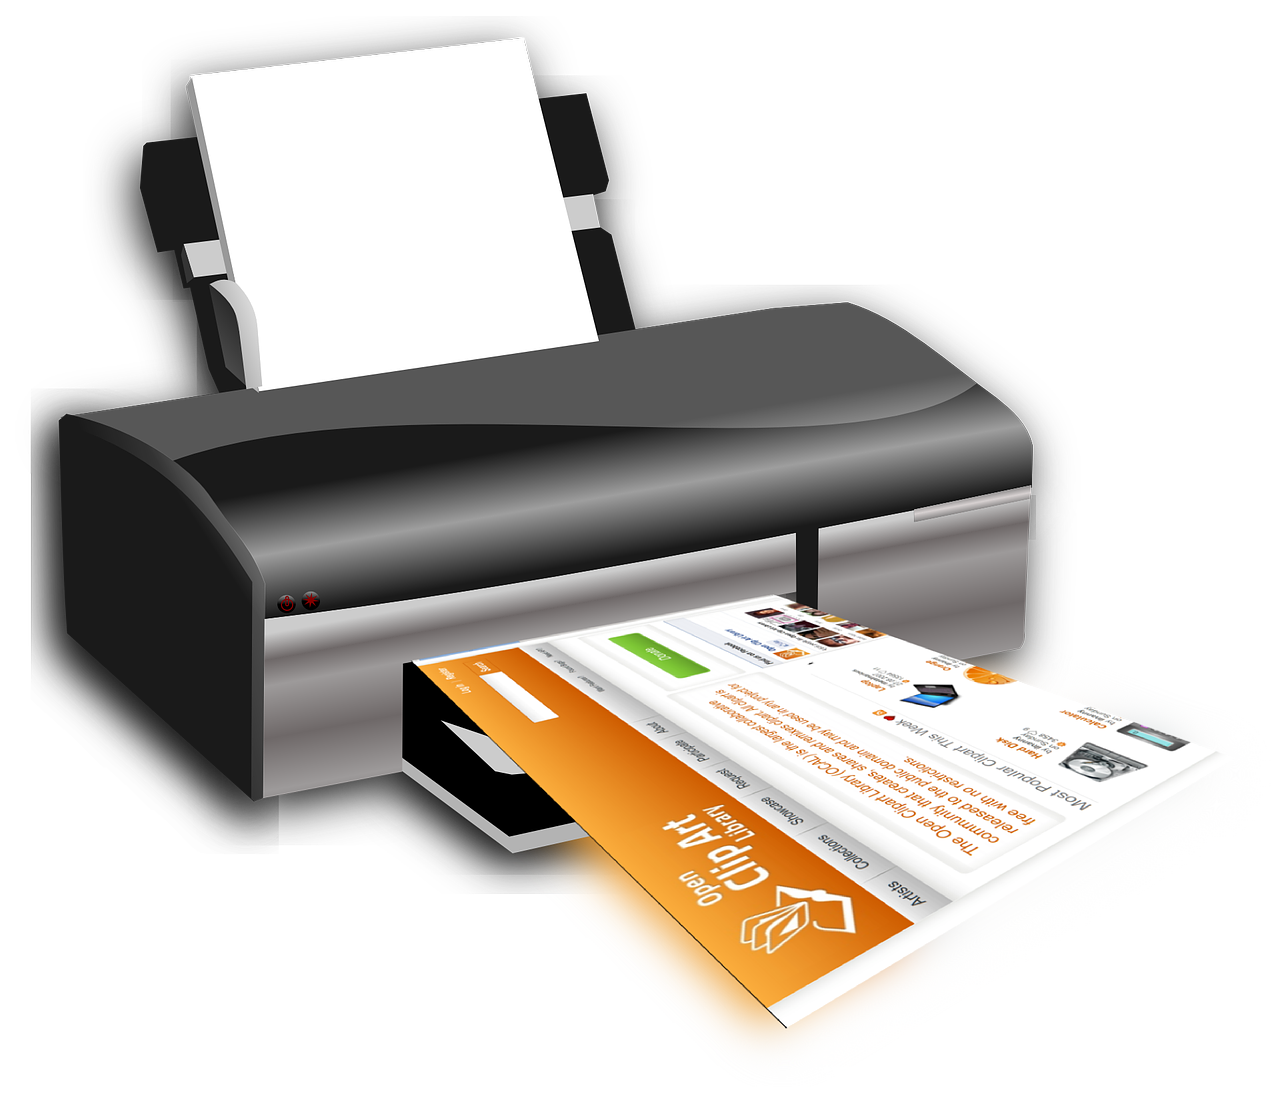 Main Features of the Compact Photo Printer